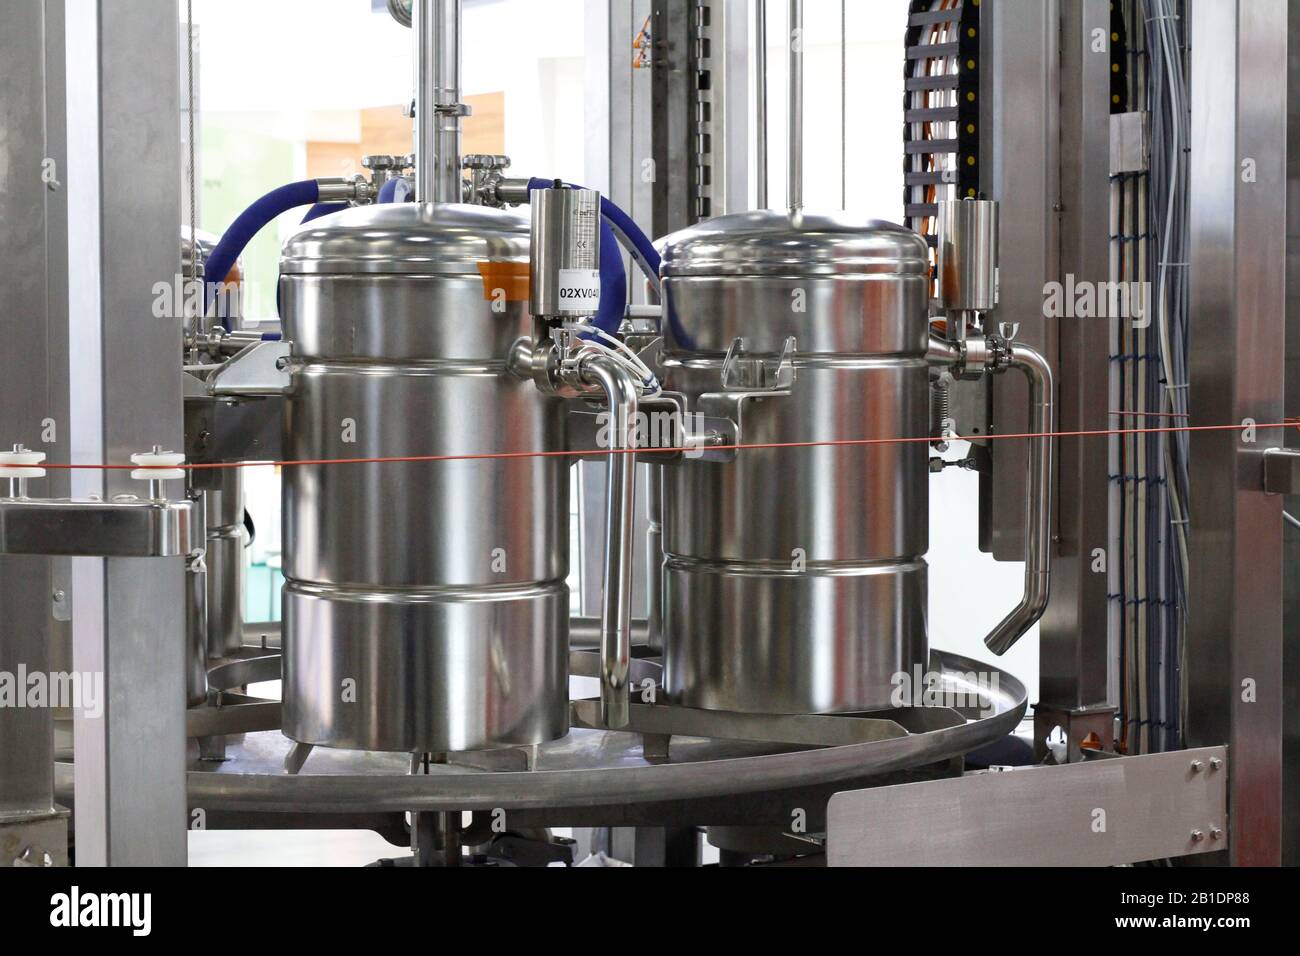 Stainless steel pipes in a food factory. Stainless steel fittings. Tubular heat exchangers. Food pumps. Technological equipment at the dairy factory. Stock Photo